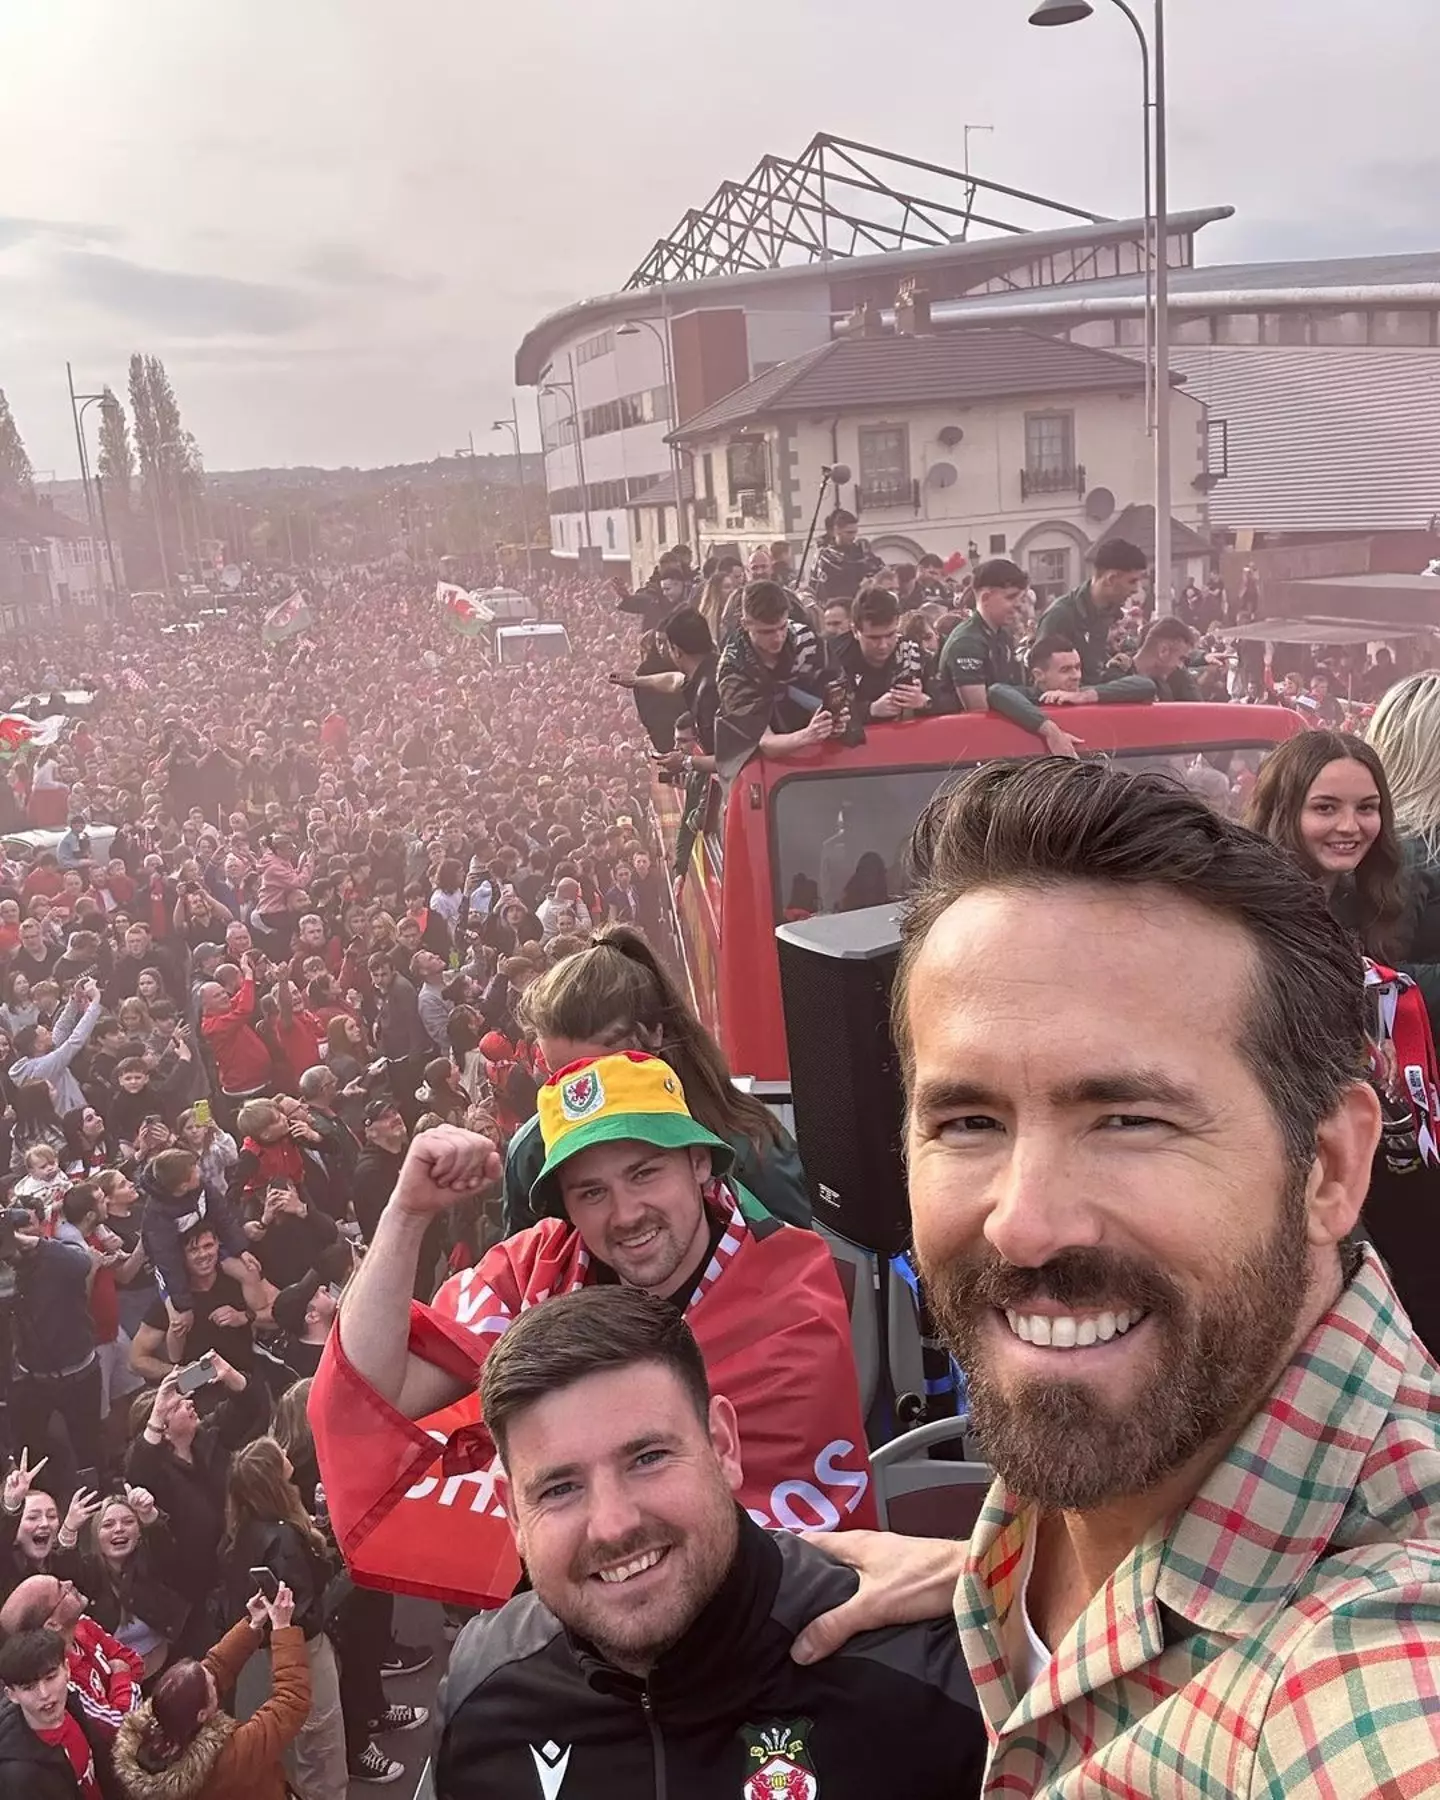 Reynolds signed a whopping 25-year stadium lease in Wrexham to assure fans that the team would stay put in their beloved town.